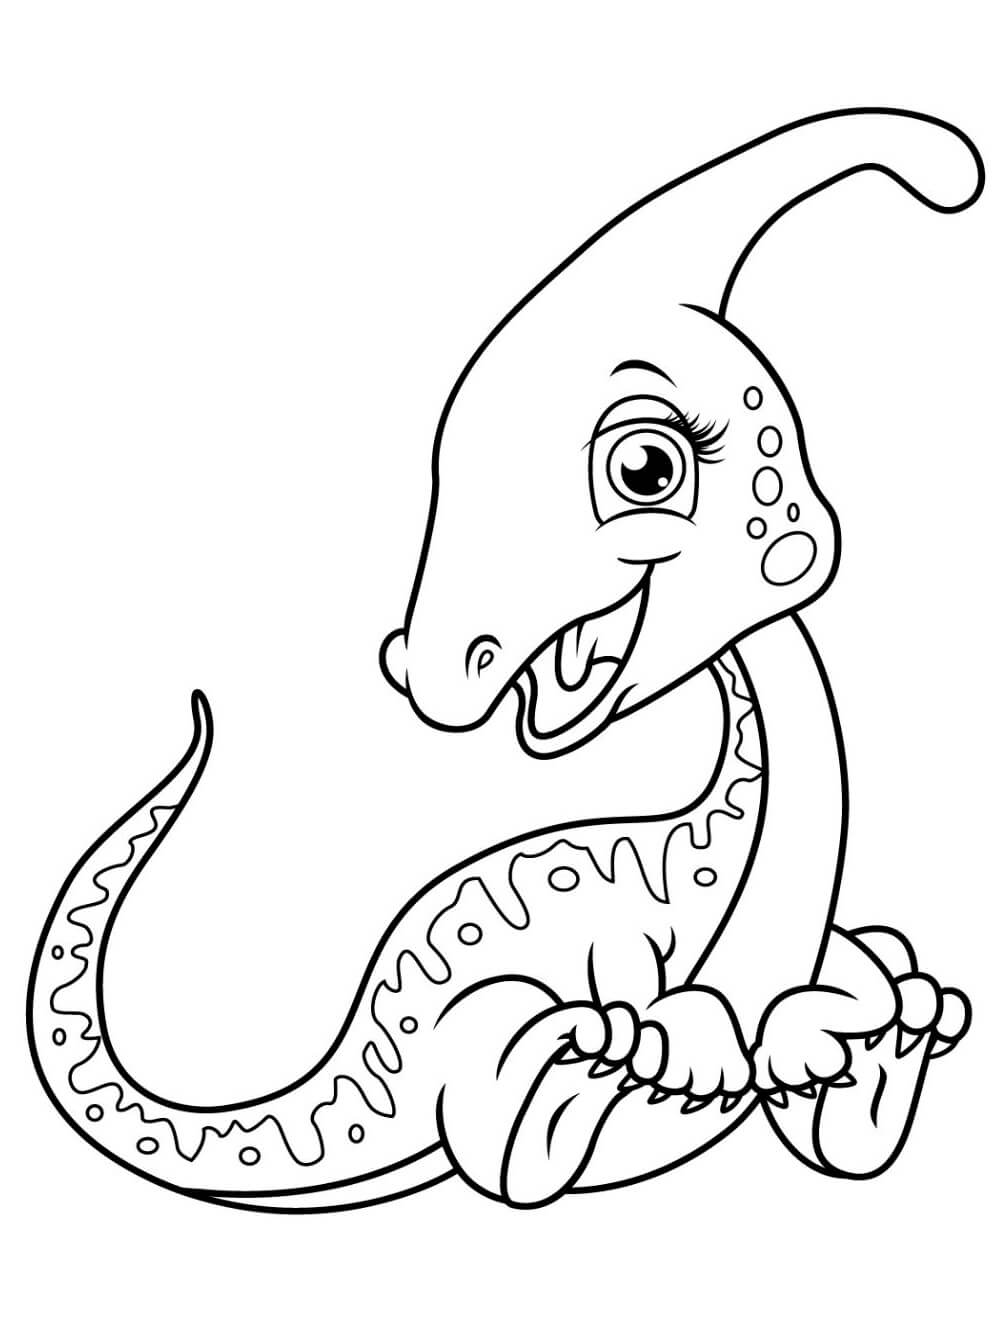 Adorable Dinosaure coloring page